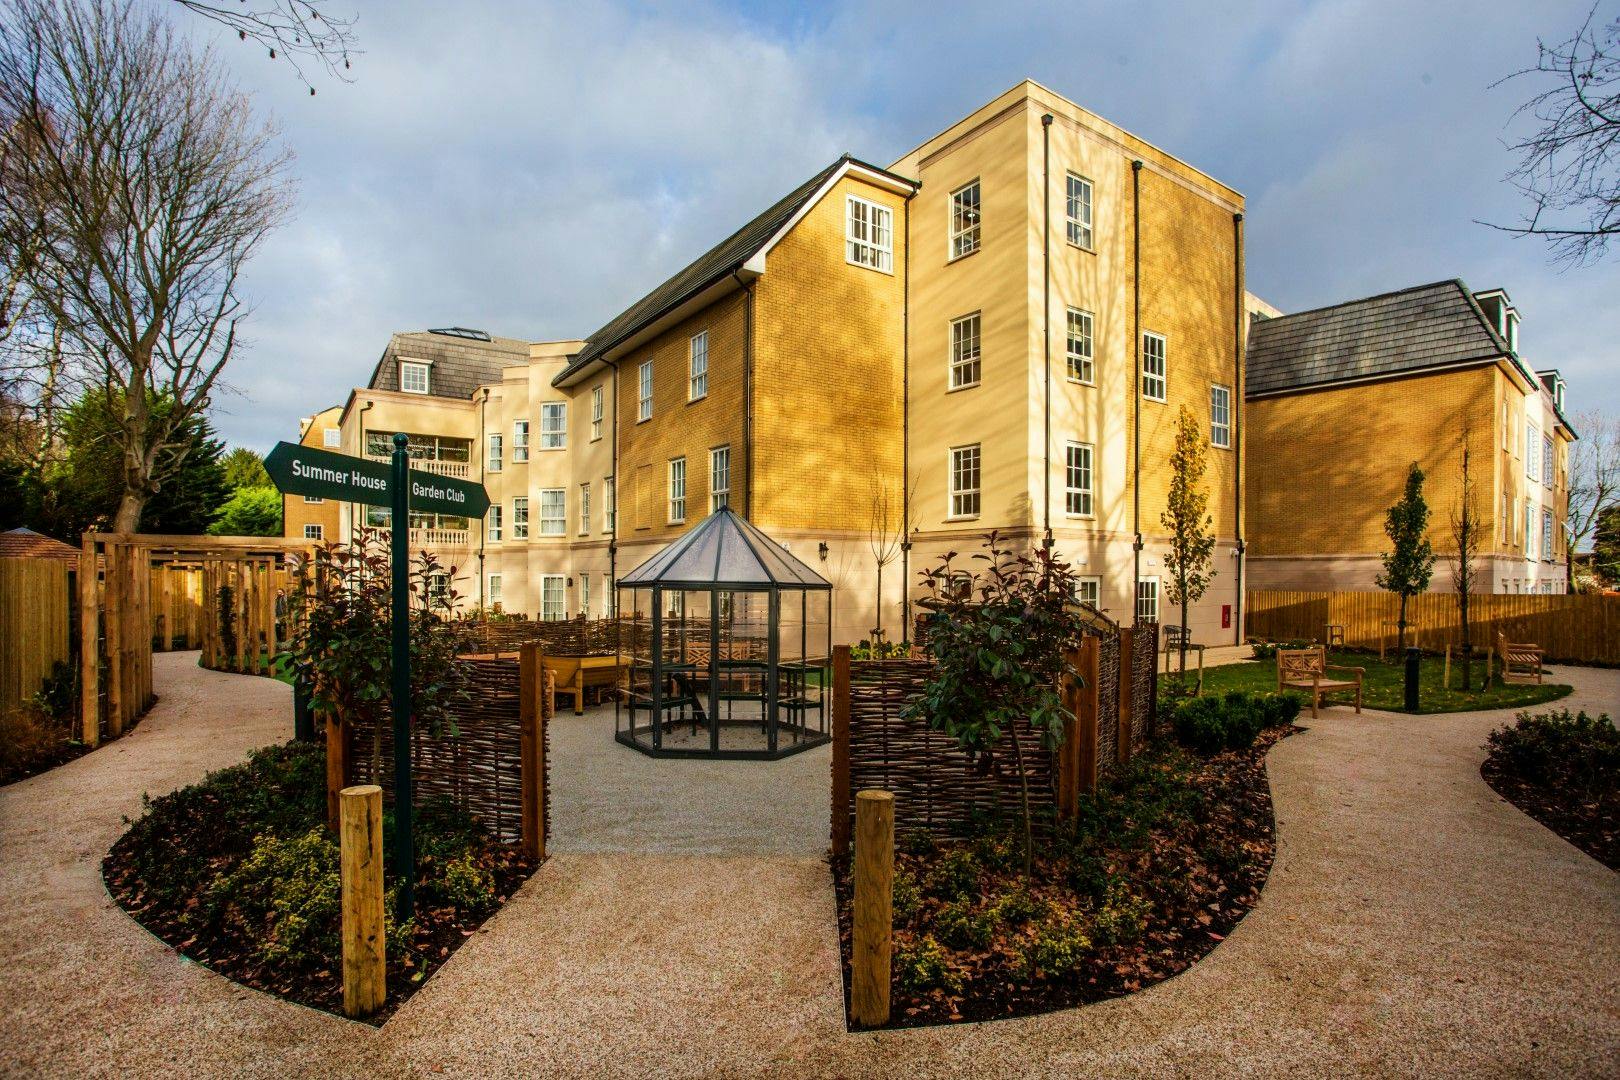 Exterior of Hutton View Care Home in Brentwood, Essex